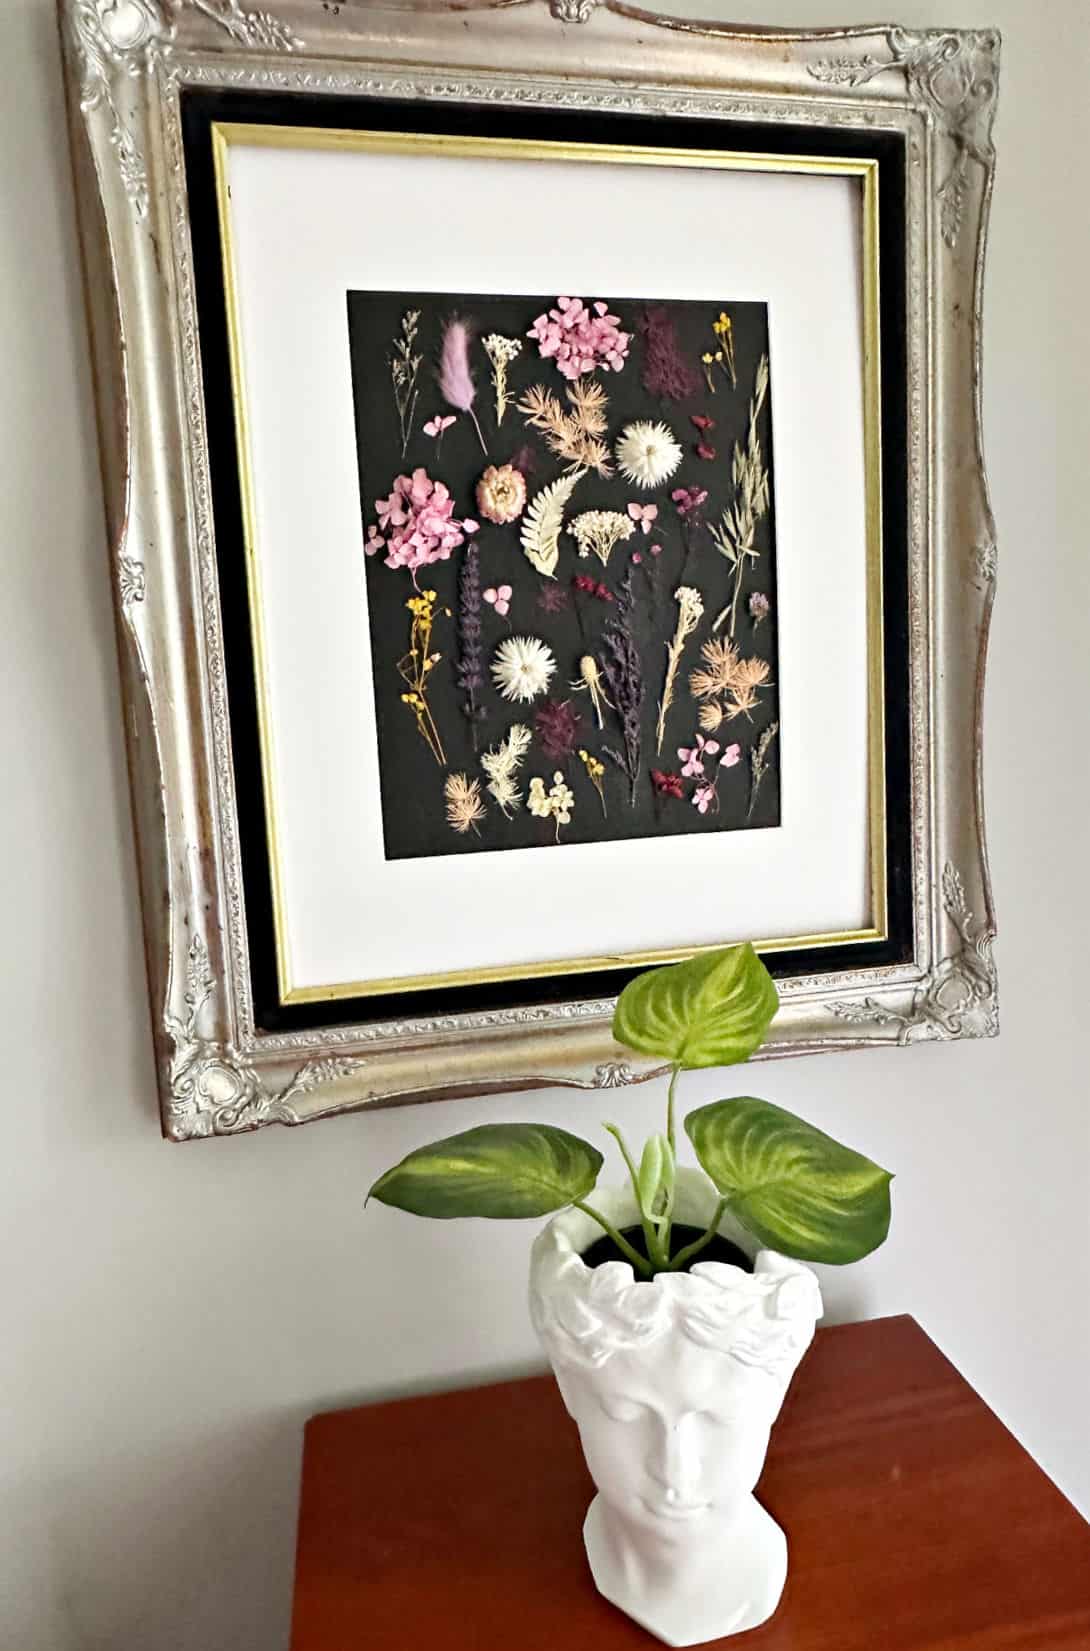 close up of framed dried pressed flower art on wall.